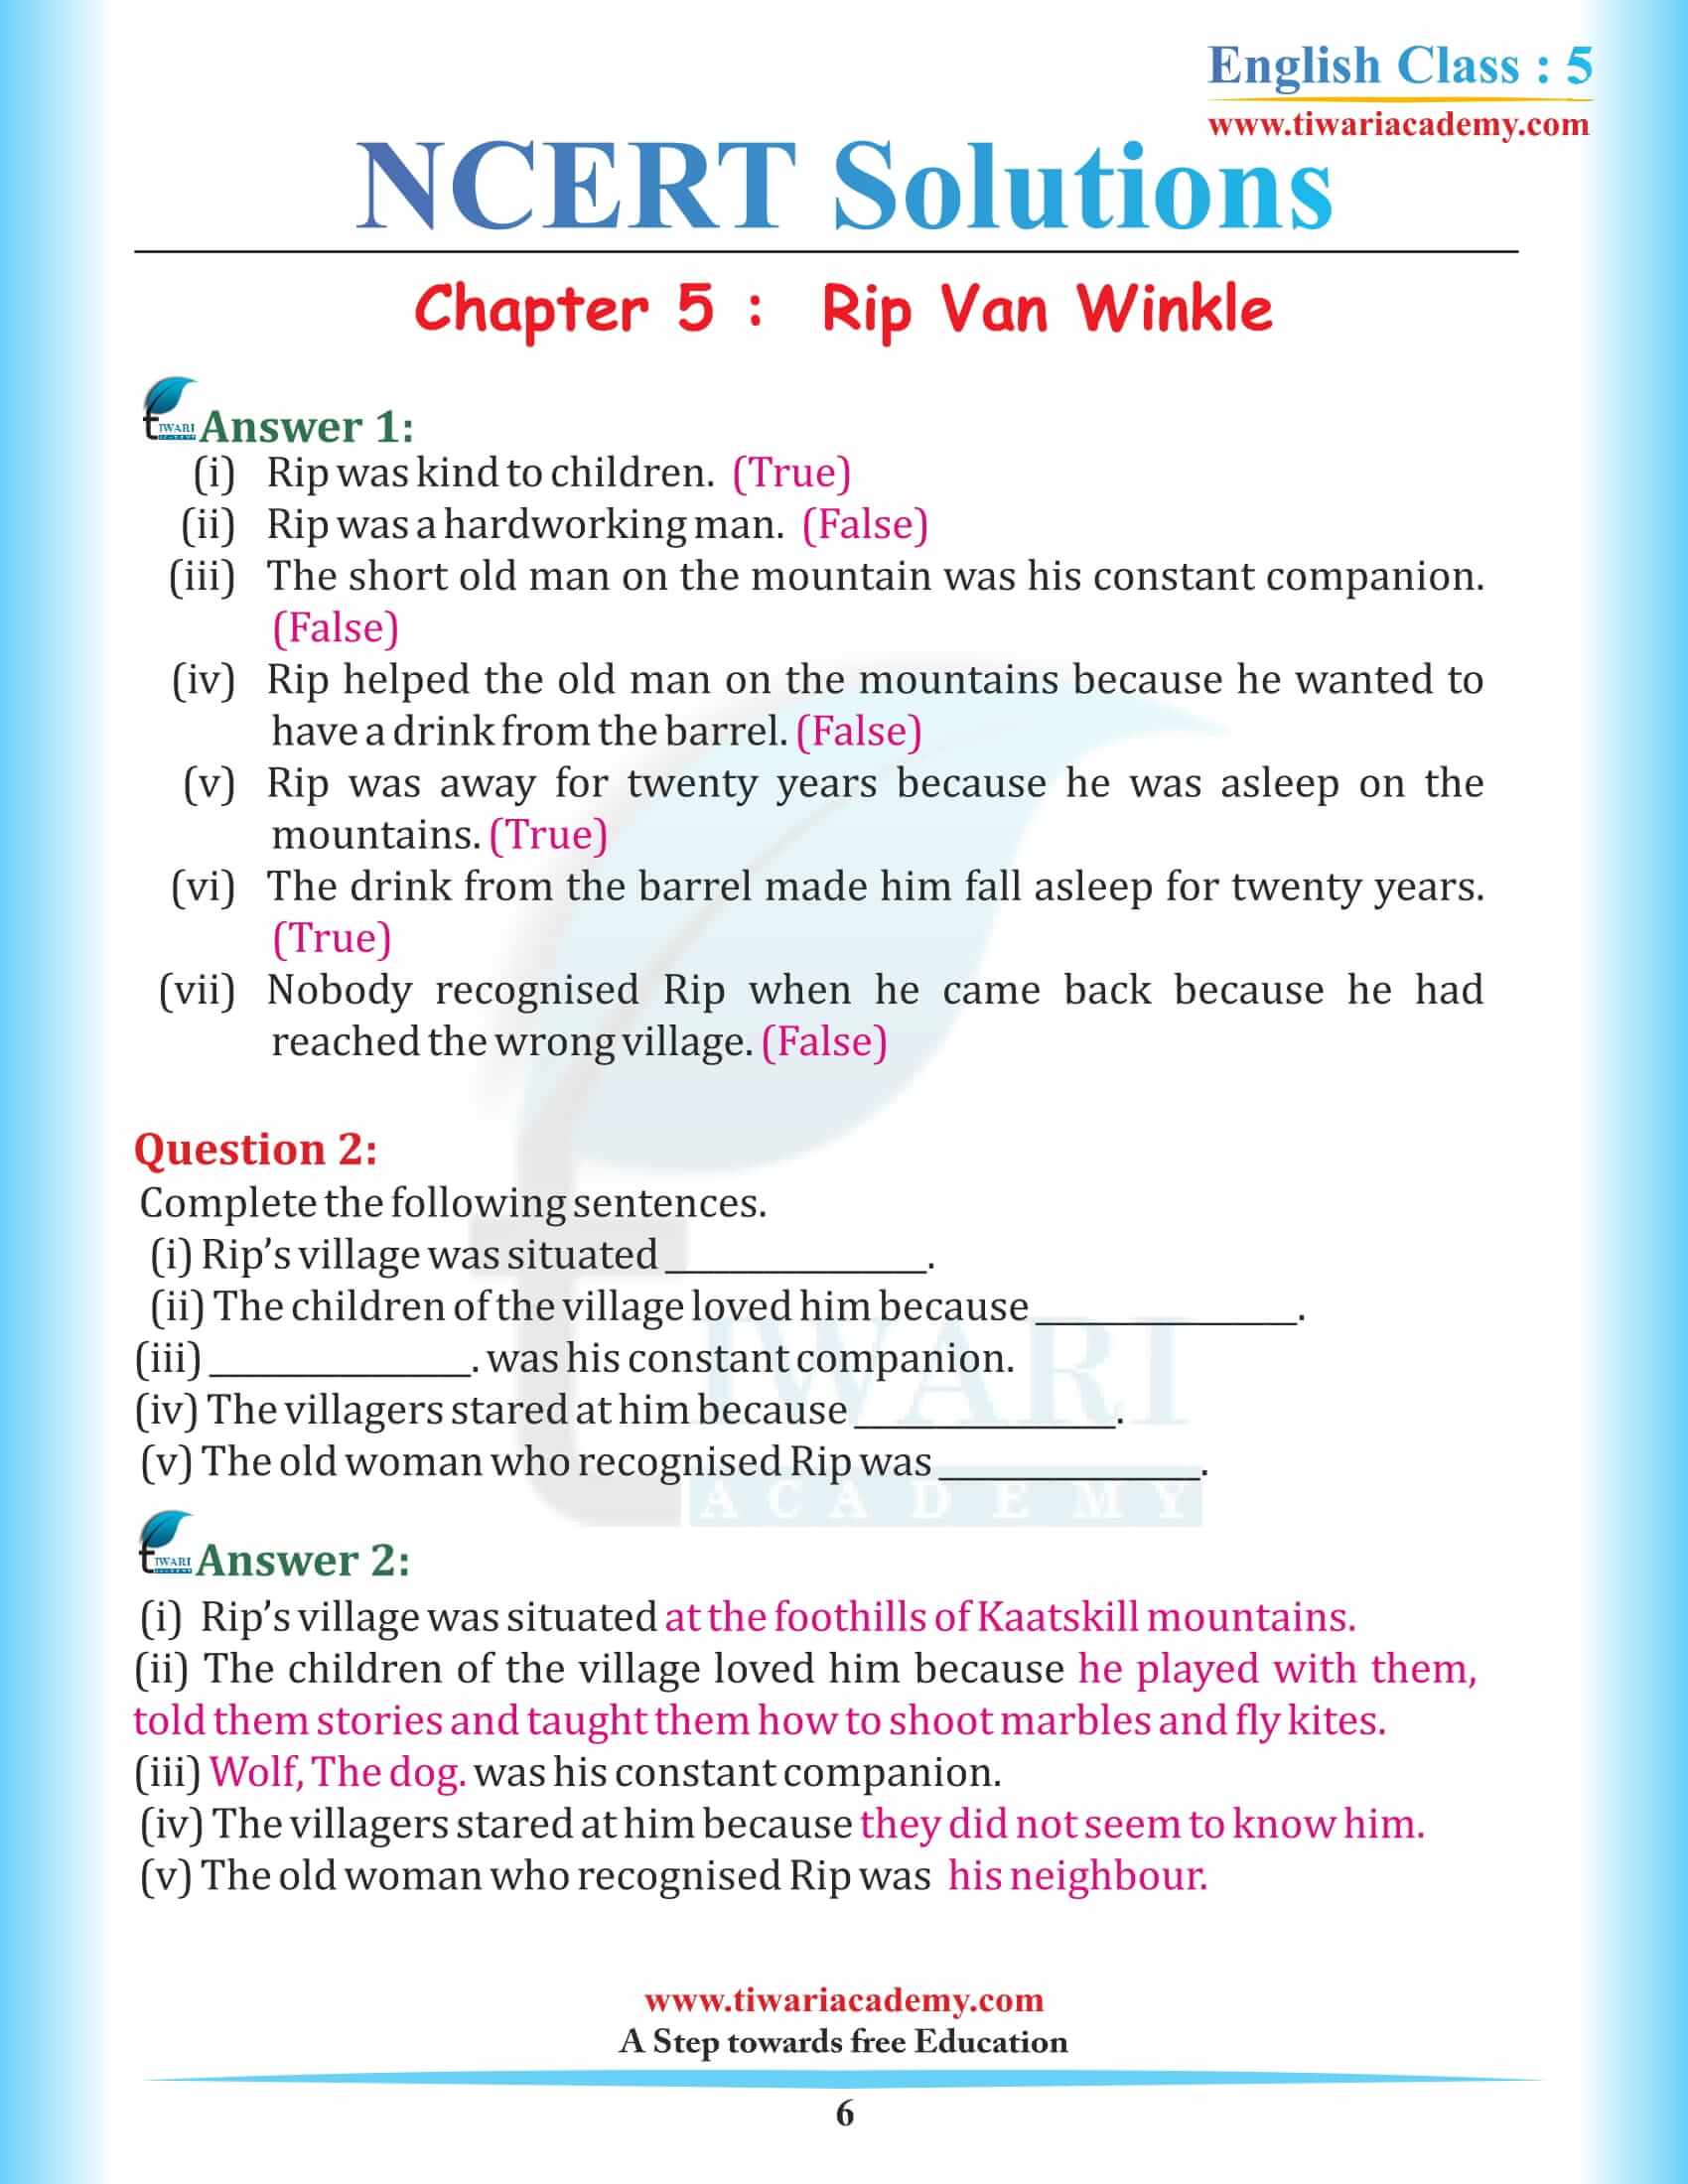 NCERT Solutions for Class 5 English Chapter 5 Rip Van Winkle free download